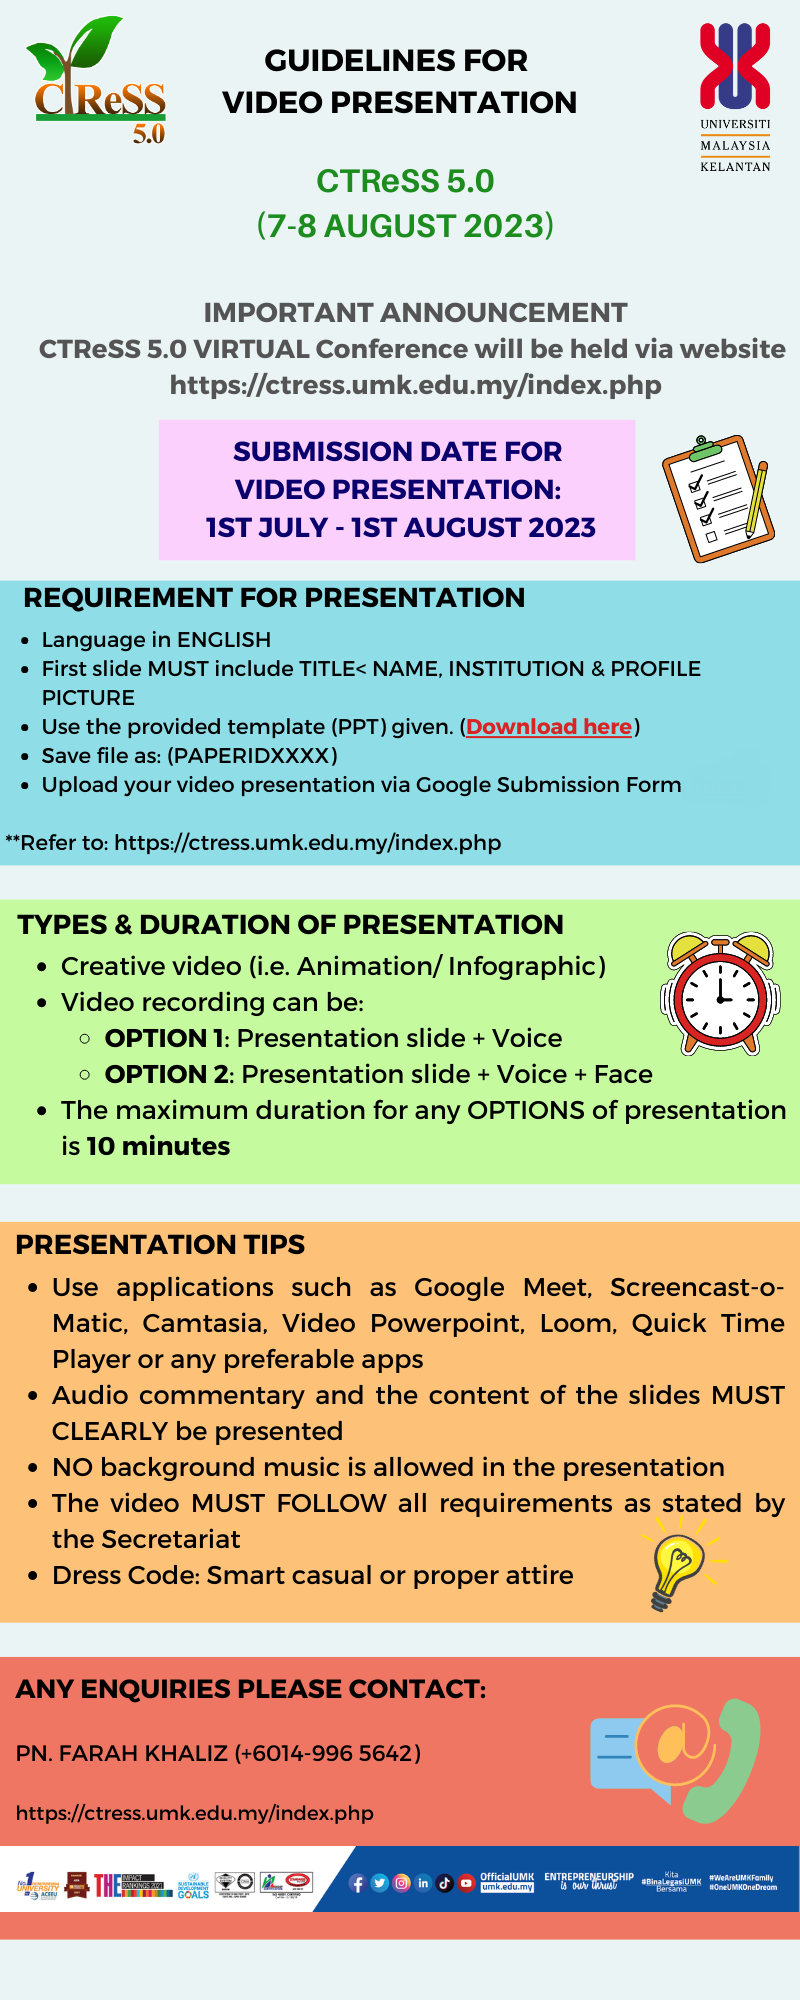 GUIDELINES FOR VIDEO PRESENTATION